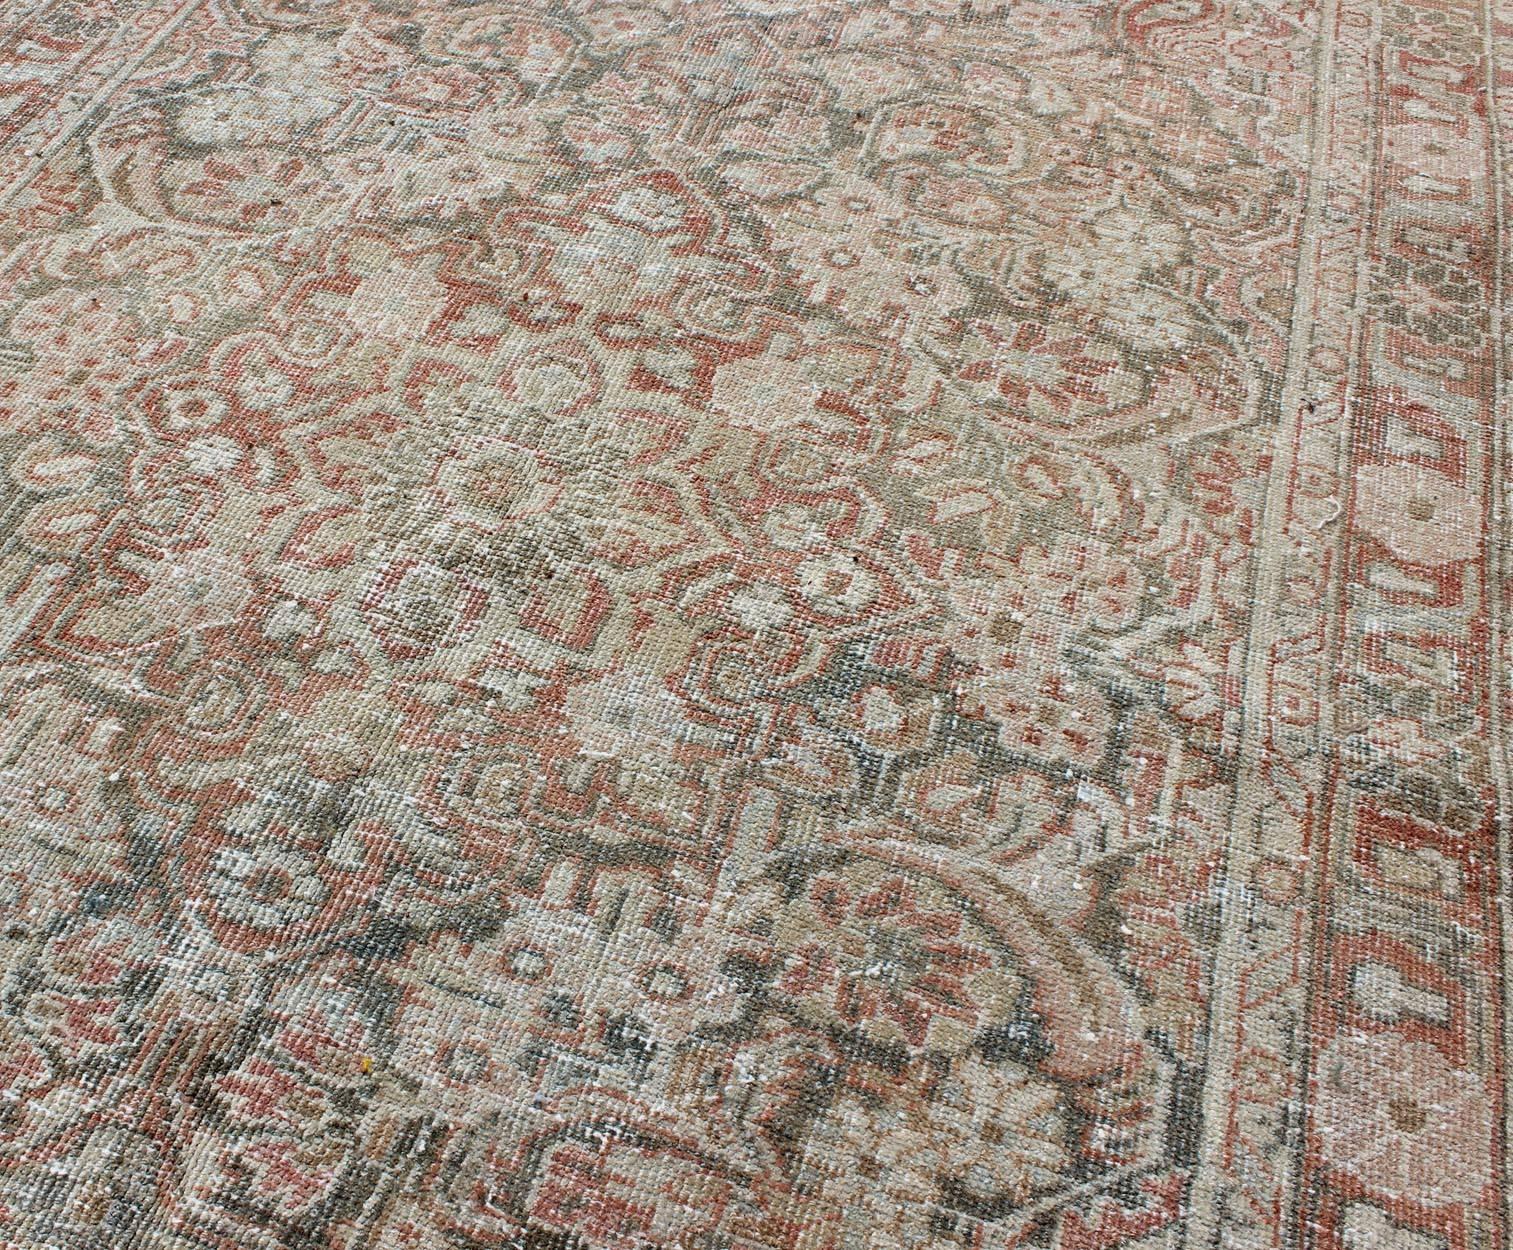 Early 20th Century Antique Persian Mahal Carpet with Flowers and Palmettes in Faint Green